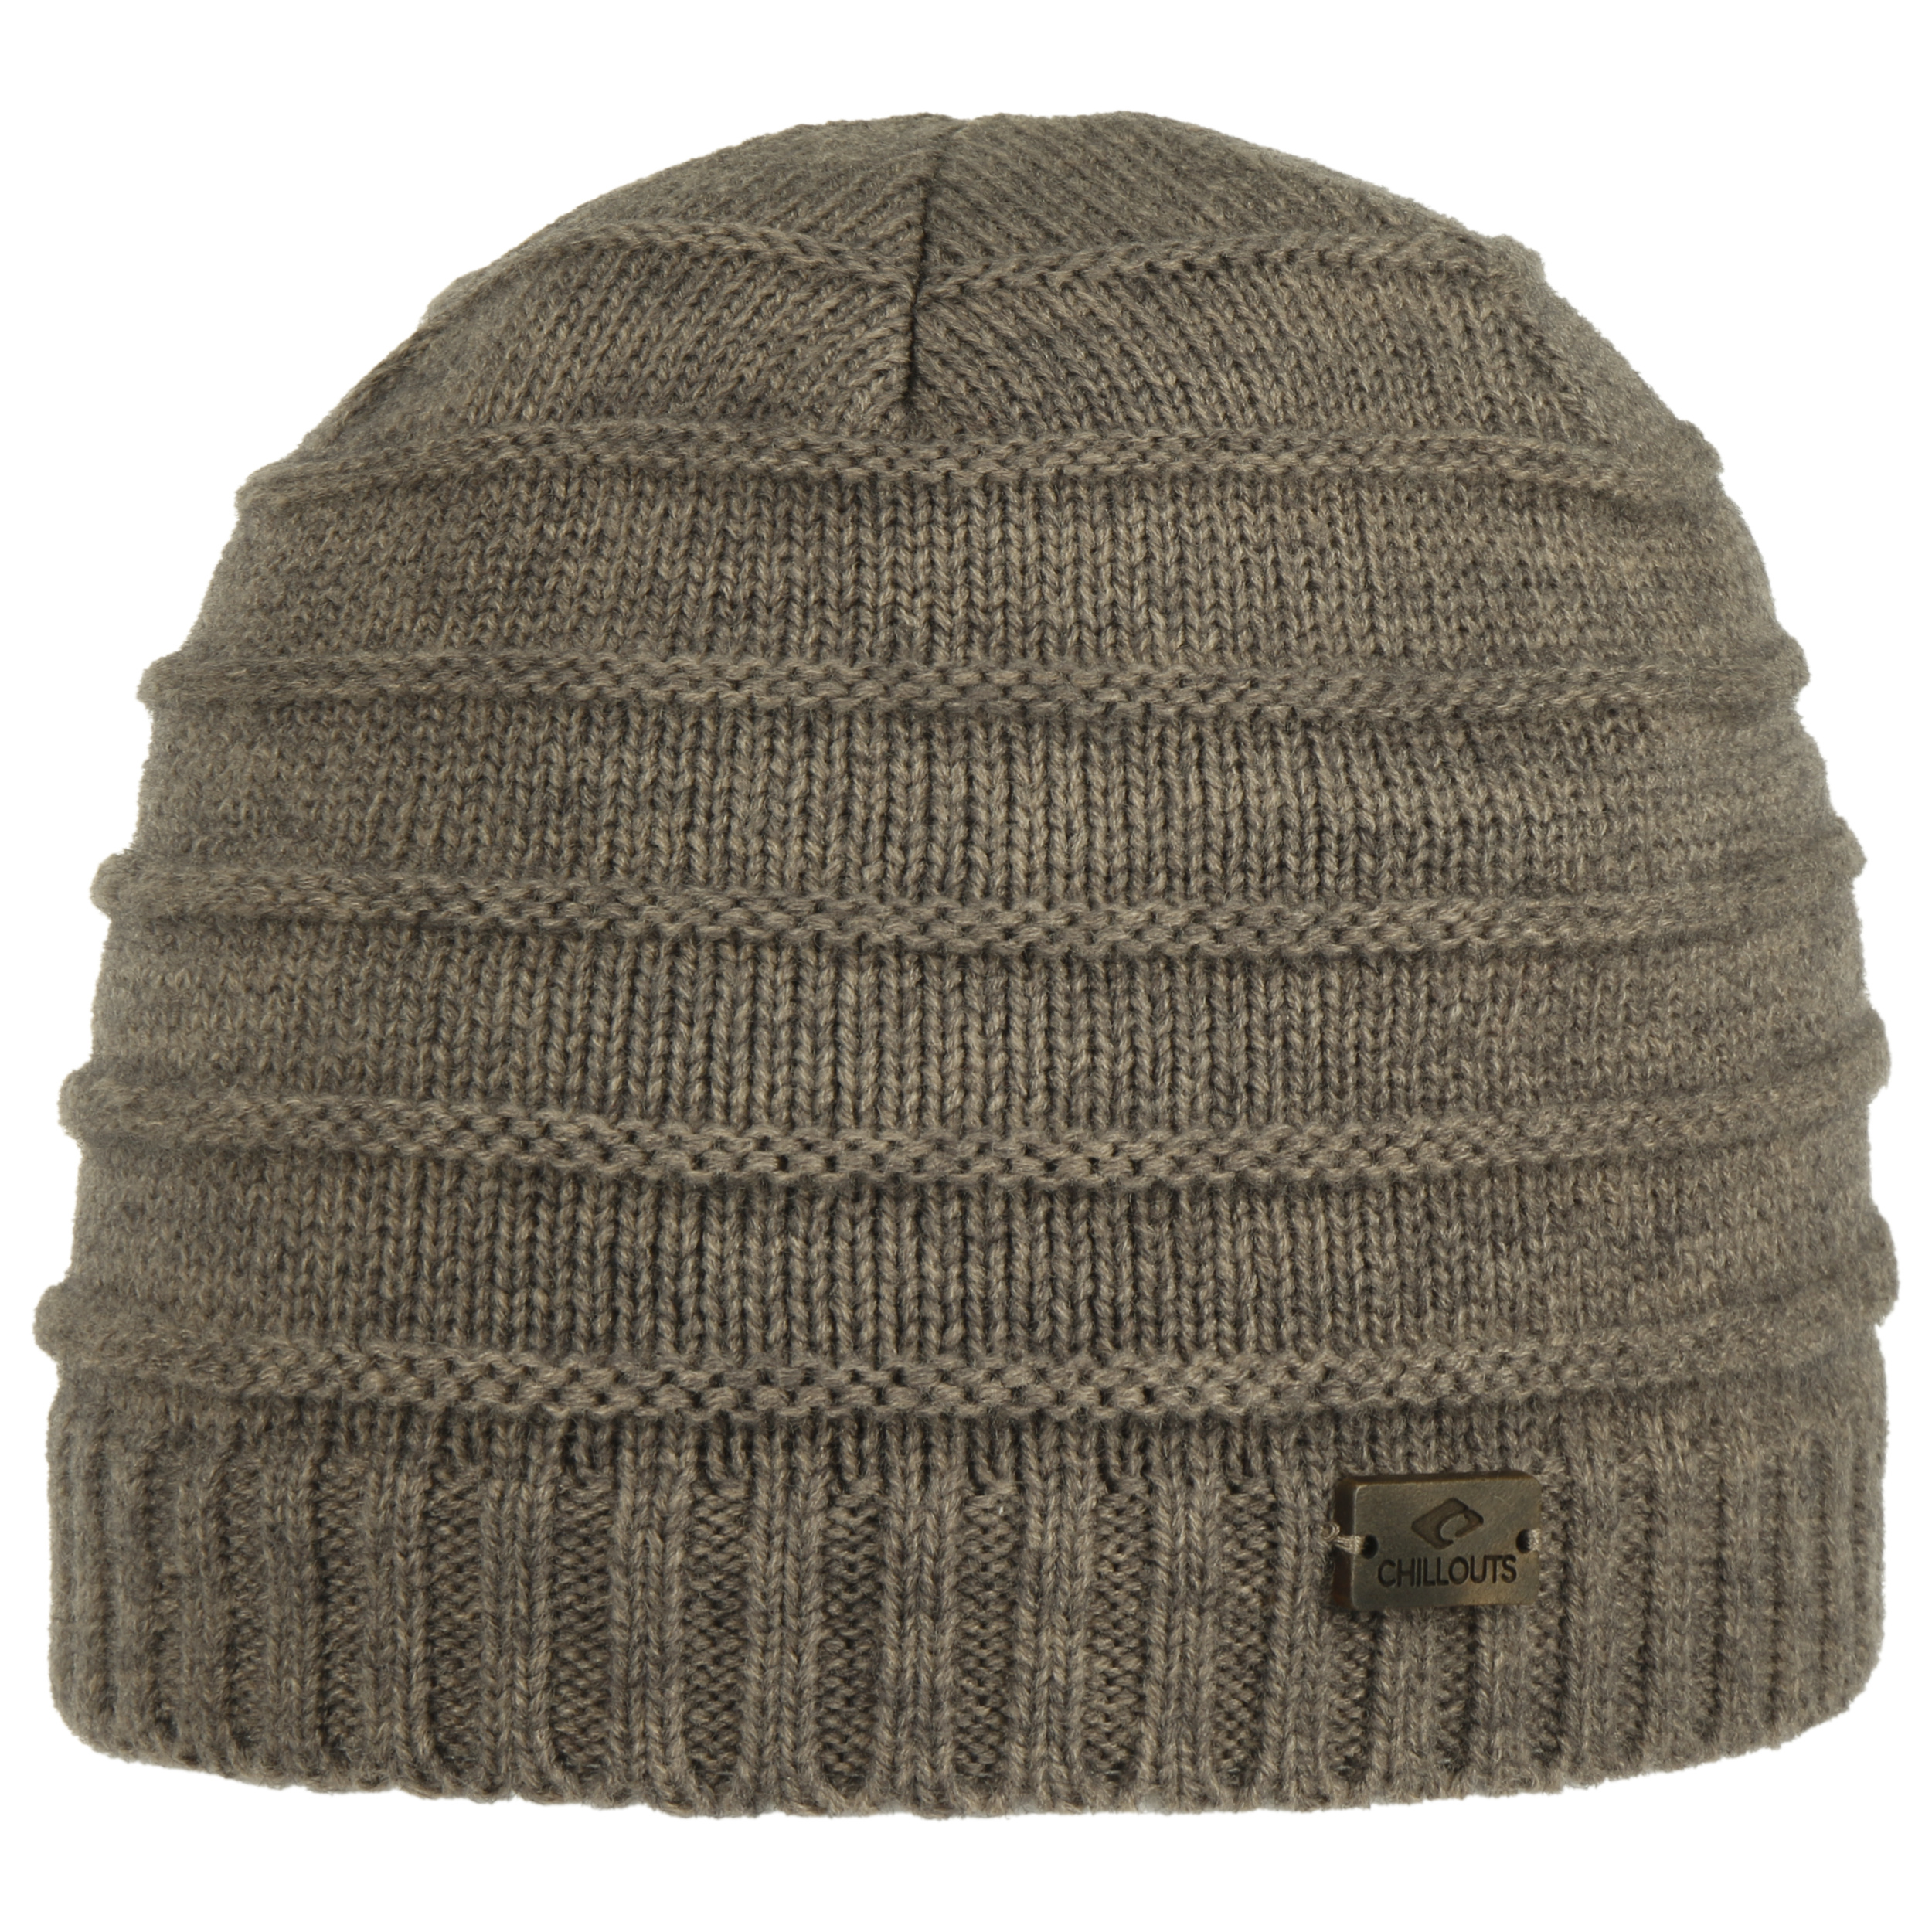 Arne Beanie Hat by Chillouts - 26,95 €